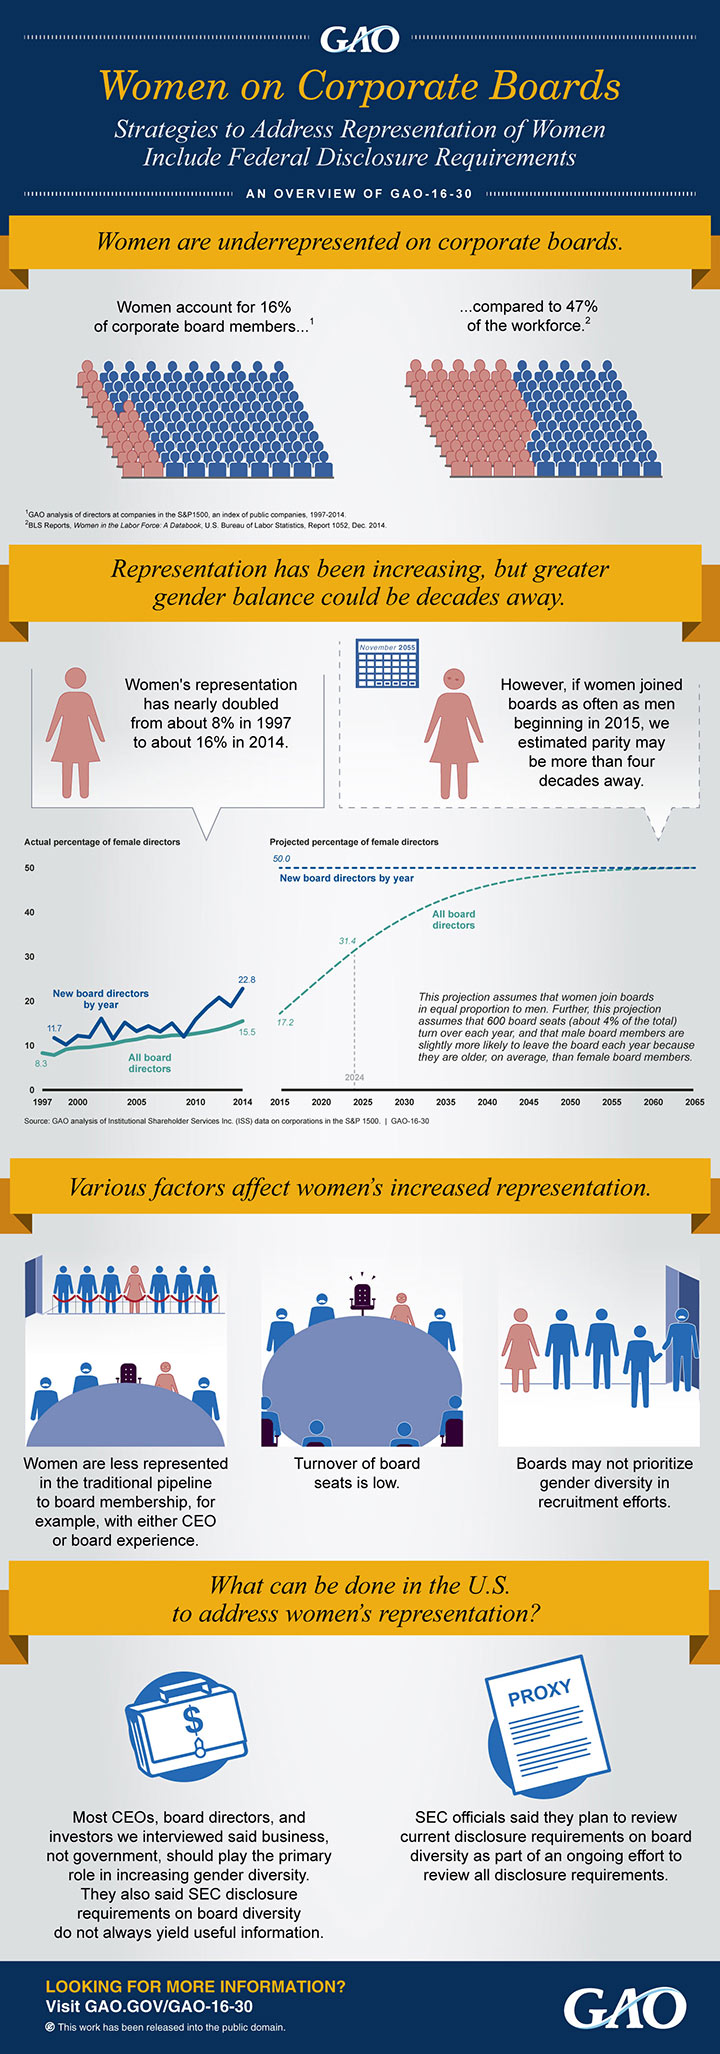 Women on Corporate Boards Infographic